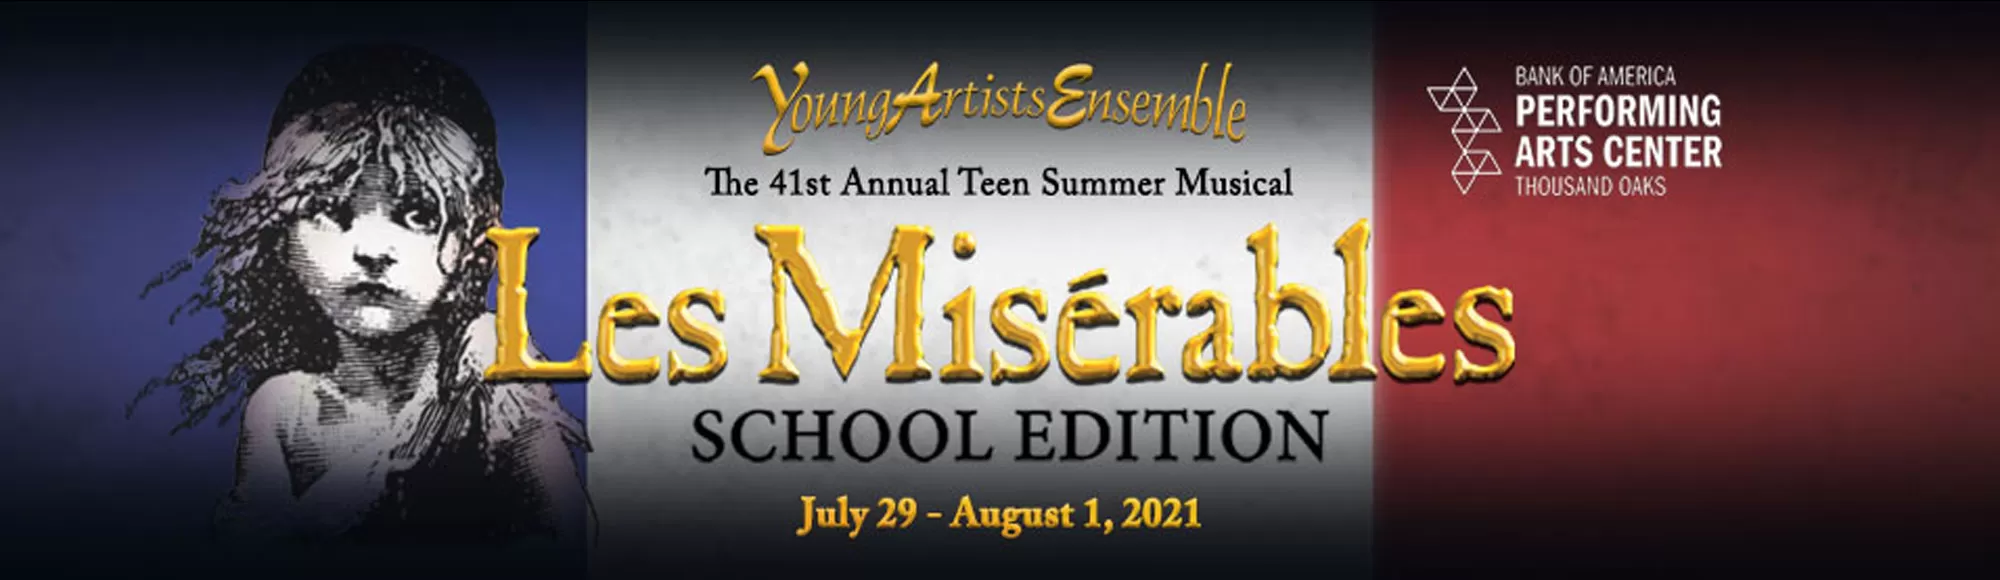 Donation to support the YAE's Les Misérables, School Edition